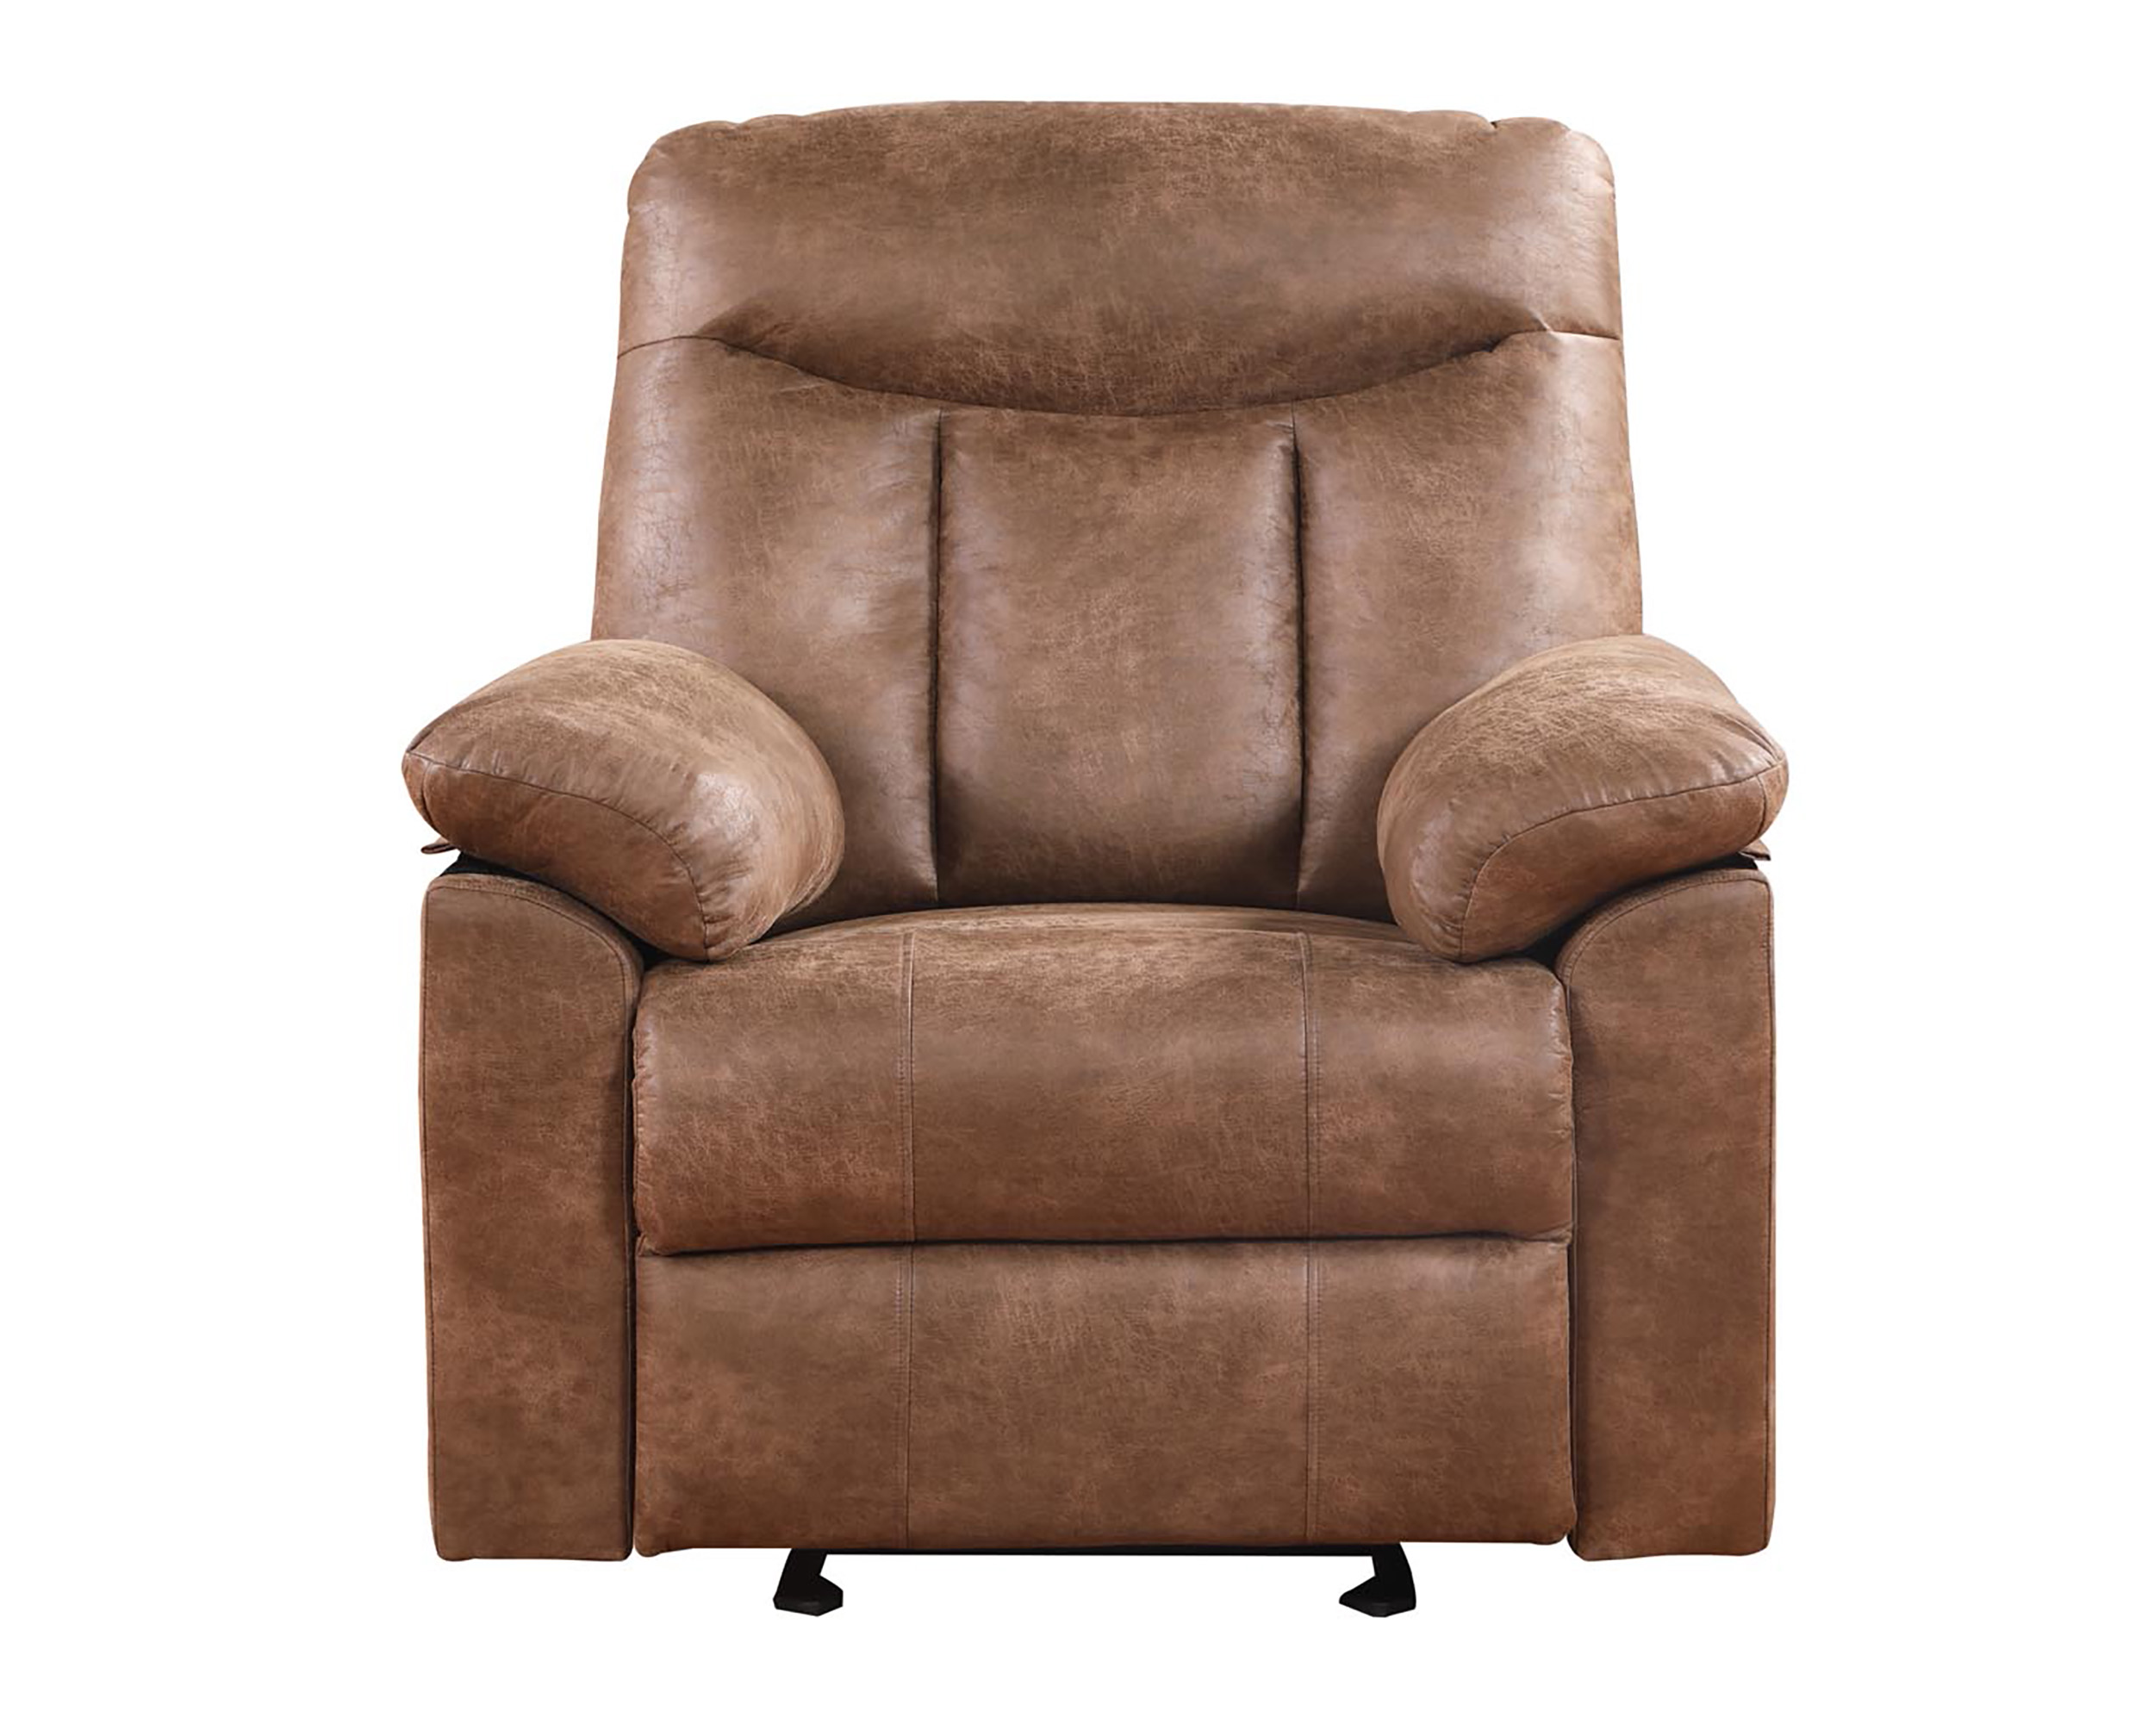 Becket Big and Tall Memory Foam Rocker Recliner W/USB Vintage Brown, Supports up to 500 lbs - image 4 of 10